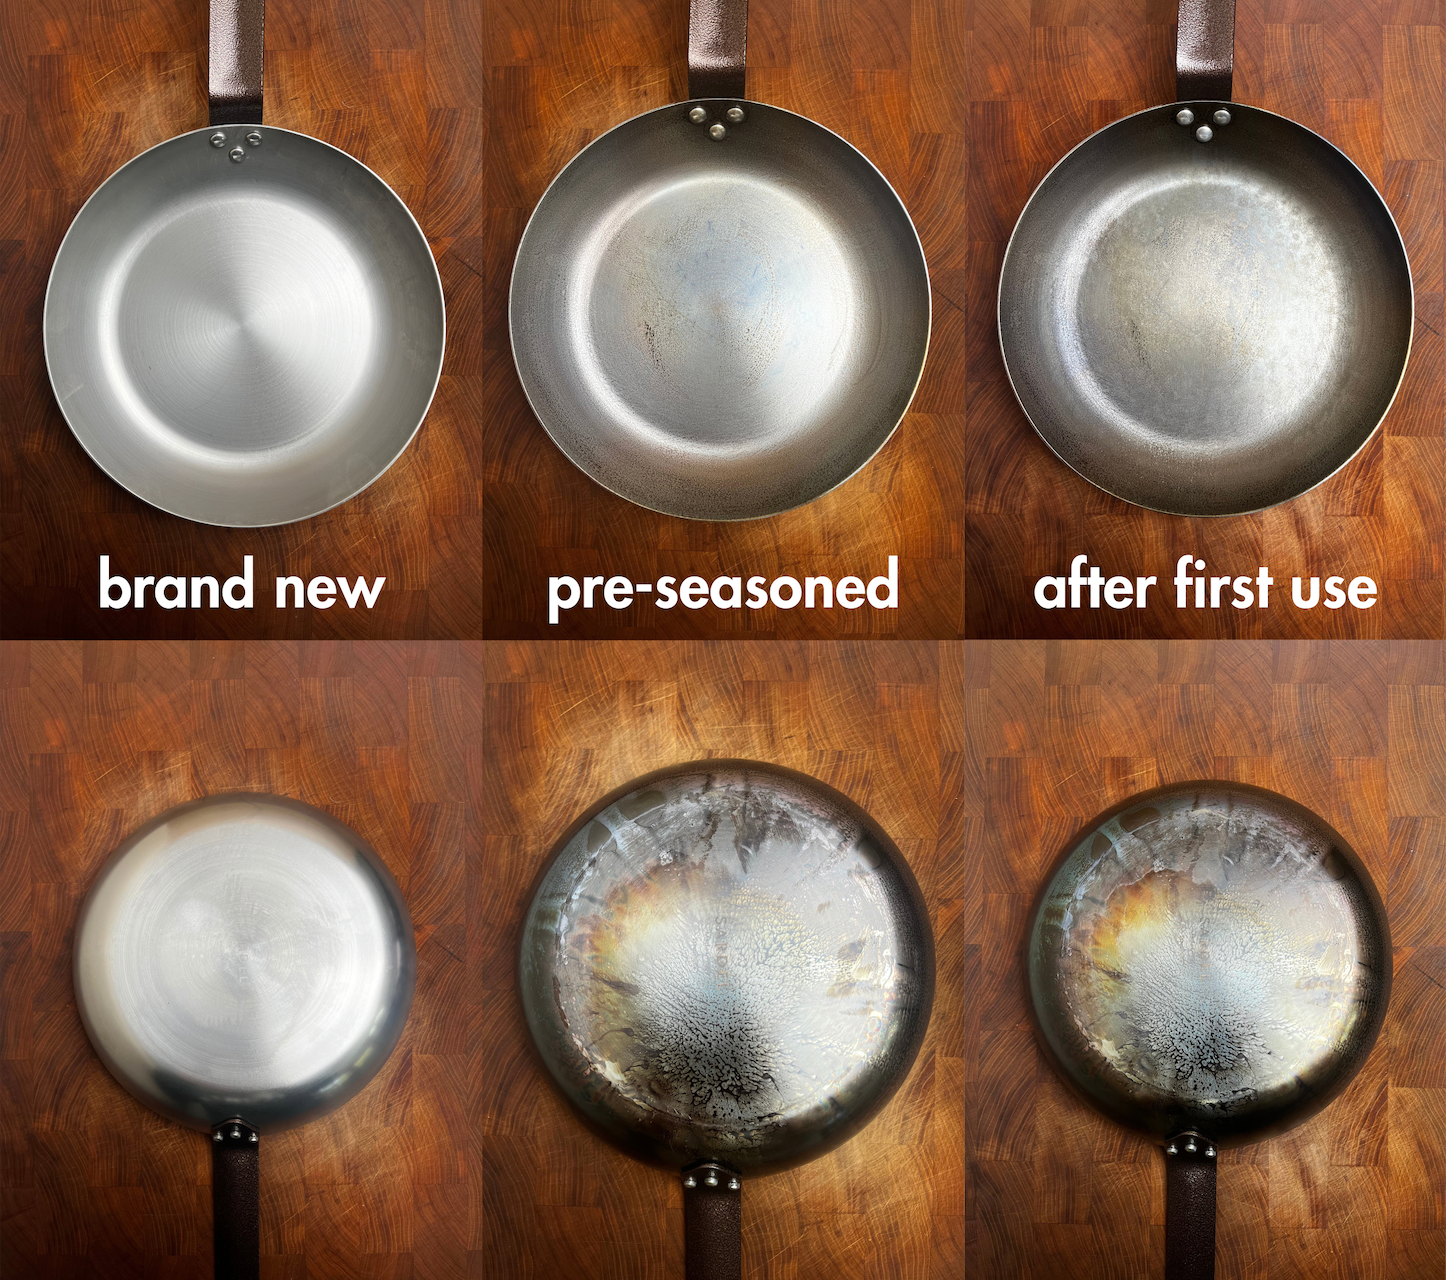 Why Carbon Steel Pans Are What the Pros Use - WSJ